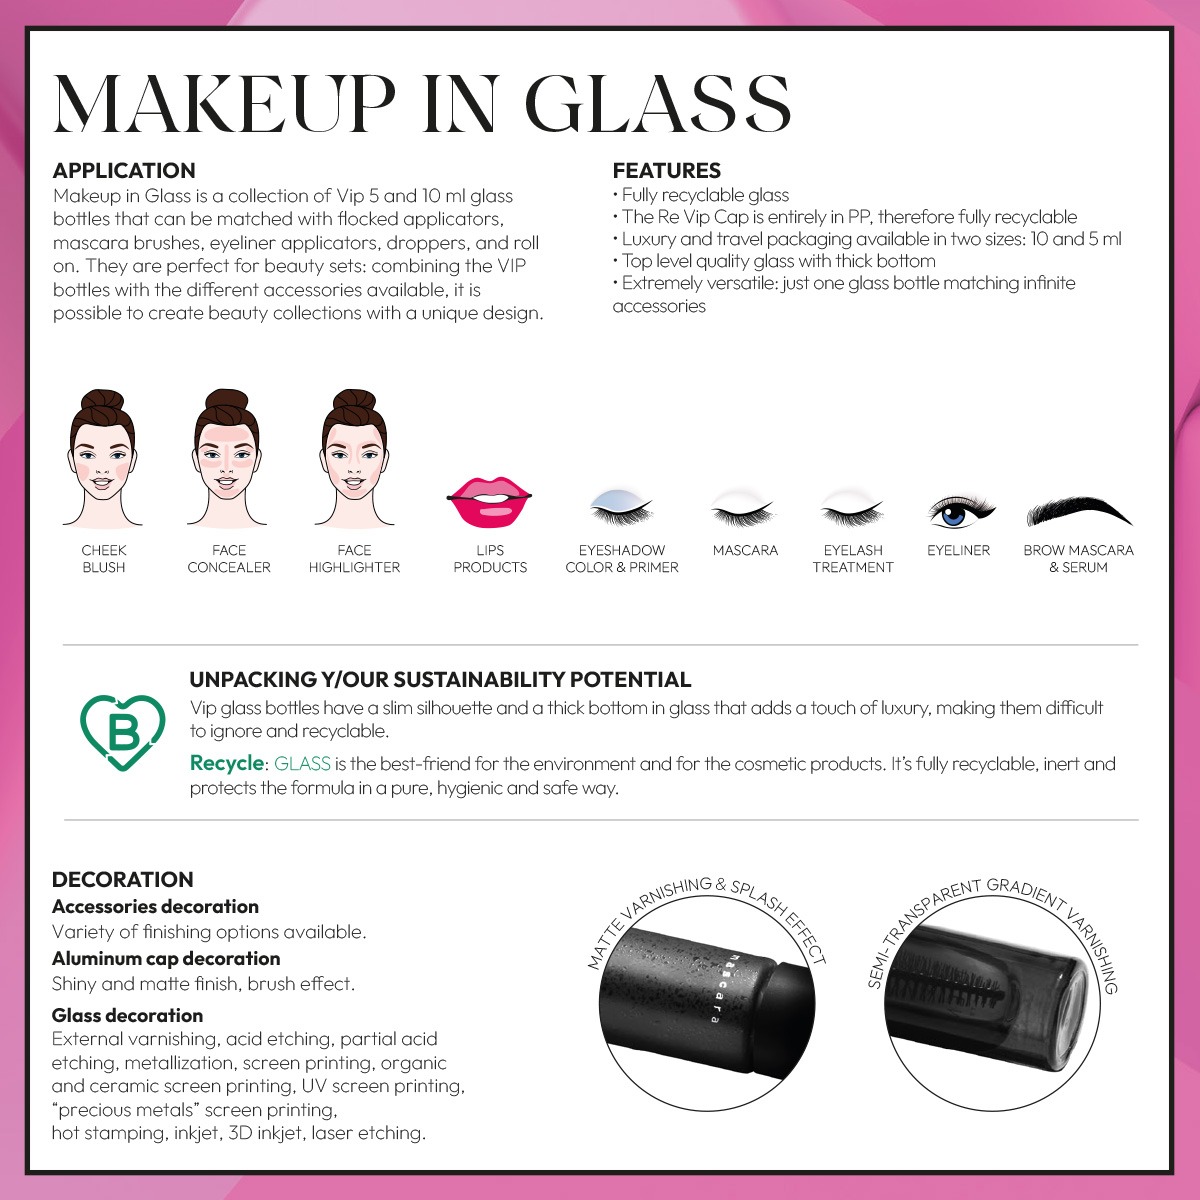 02-MAKE UP IN GLASS